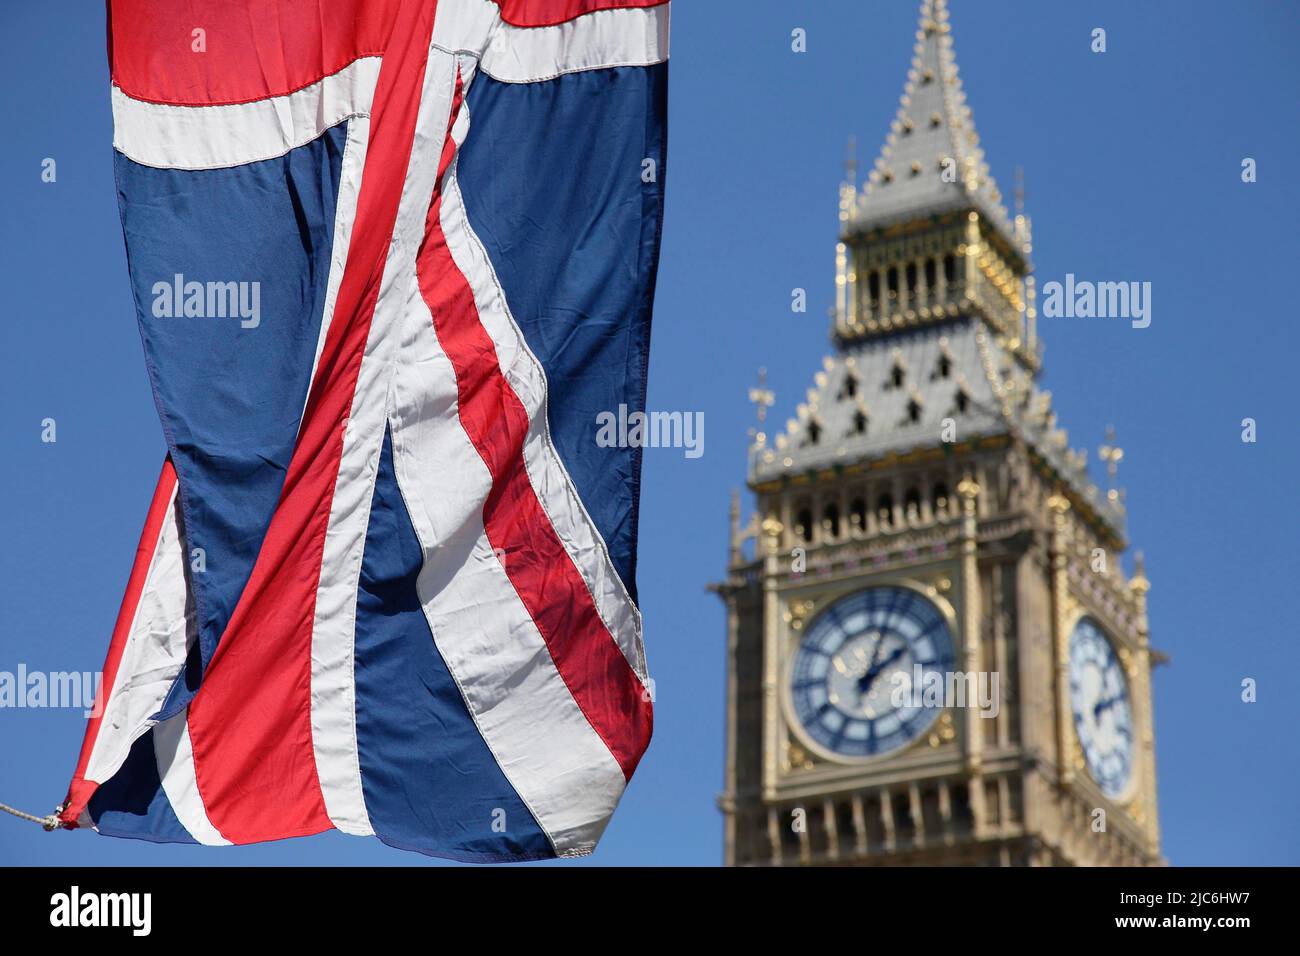 England, London, Parliament, Recently cleaned Big Ben with the Union Jack flag flying in the fioreground. Stock Photo